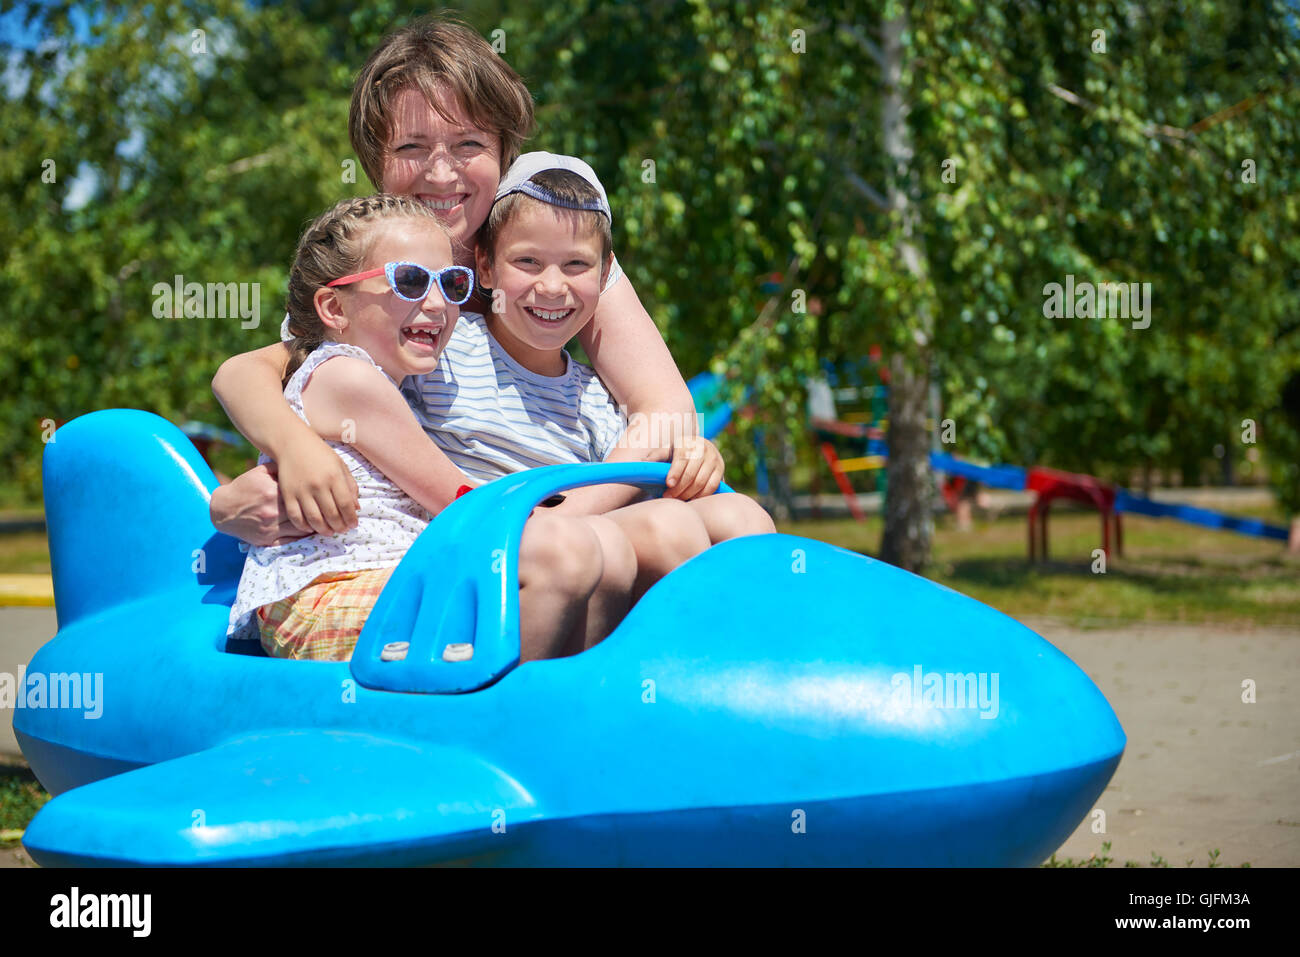 child and woman fly on blue airplane attraction in city park, happy family, summer vacation concept Stock Photo